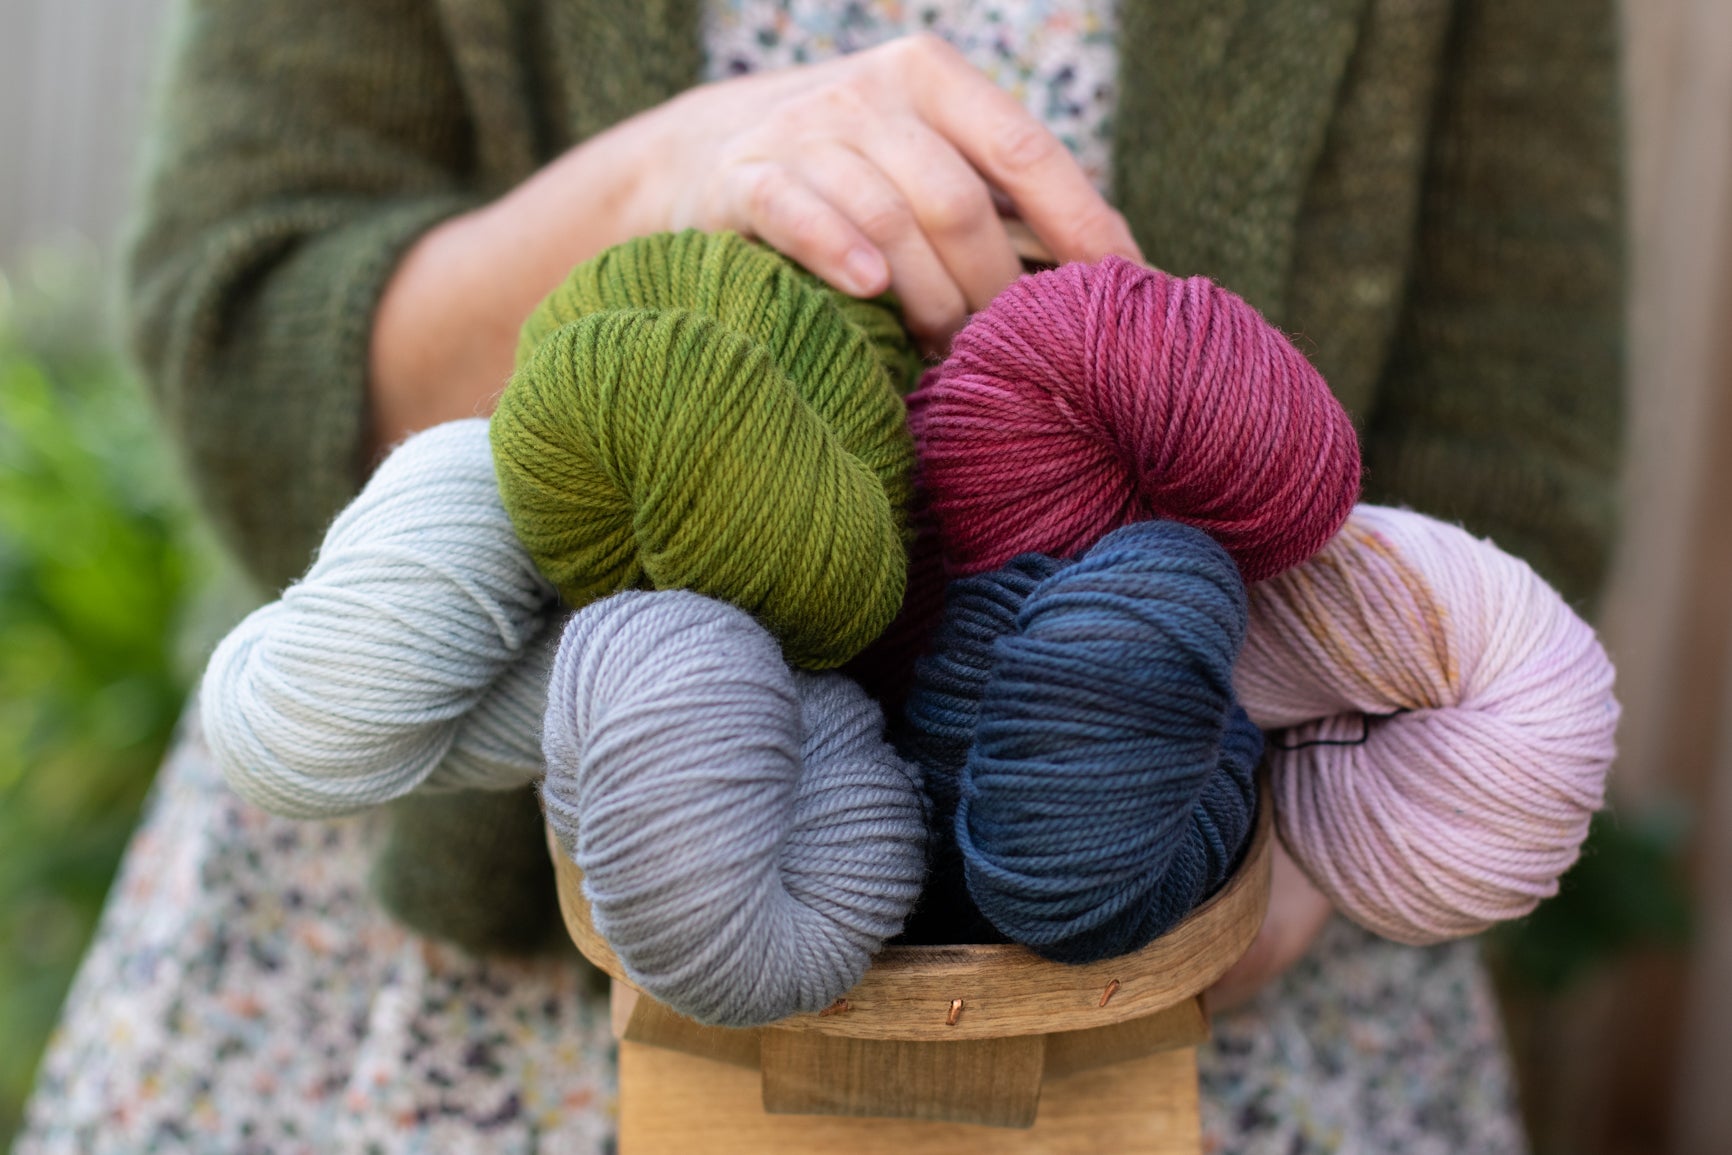 What can you make with a single skein?